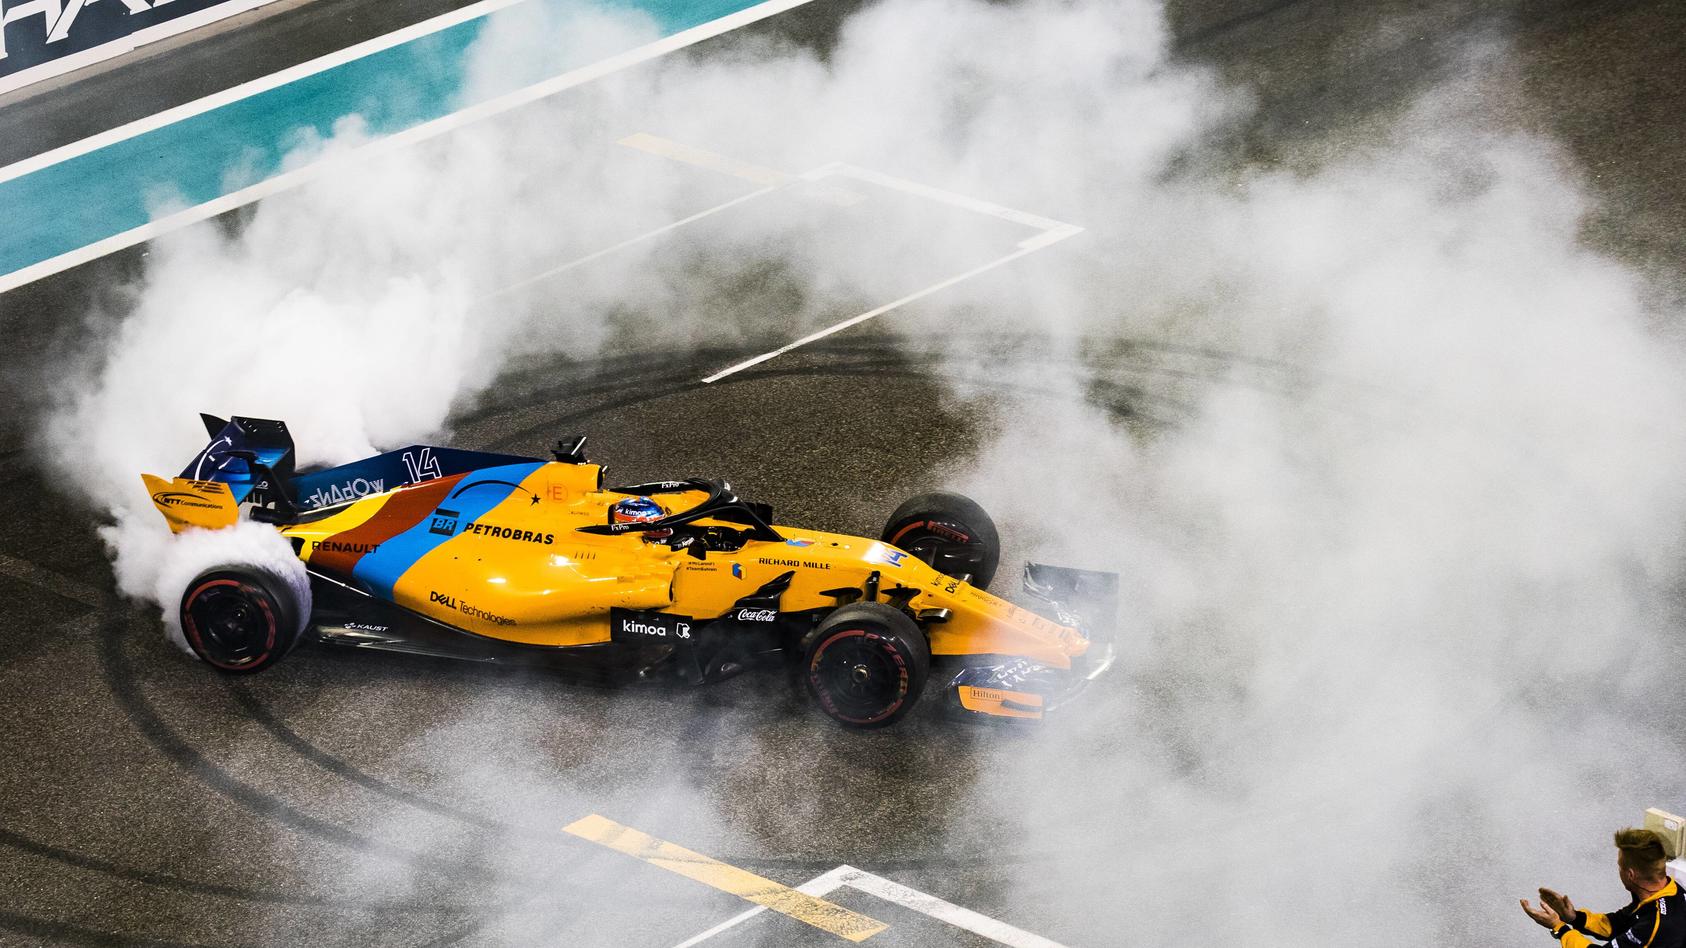 2018 Abu Dhabi GP YAS MARINA CIRCUIT, UNITED ARAB EMIRATES - NOVEMBER 25: Fernando Alonso, McLaren MCL33, performs donuts on the grid at the end of the race during the Abu Dhabi GP at Yas Marina Circuit on November 25, 2018 in Yas Marina Circuit, Uni